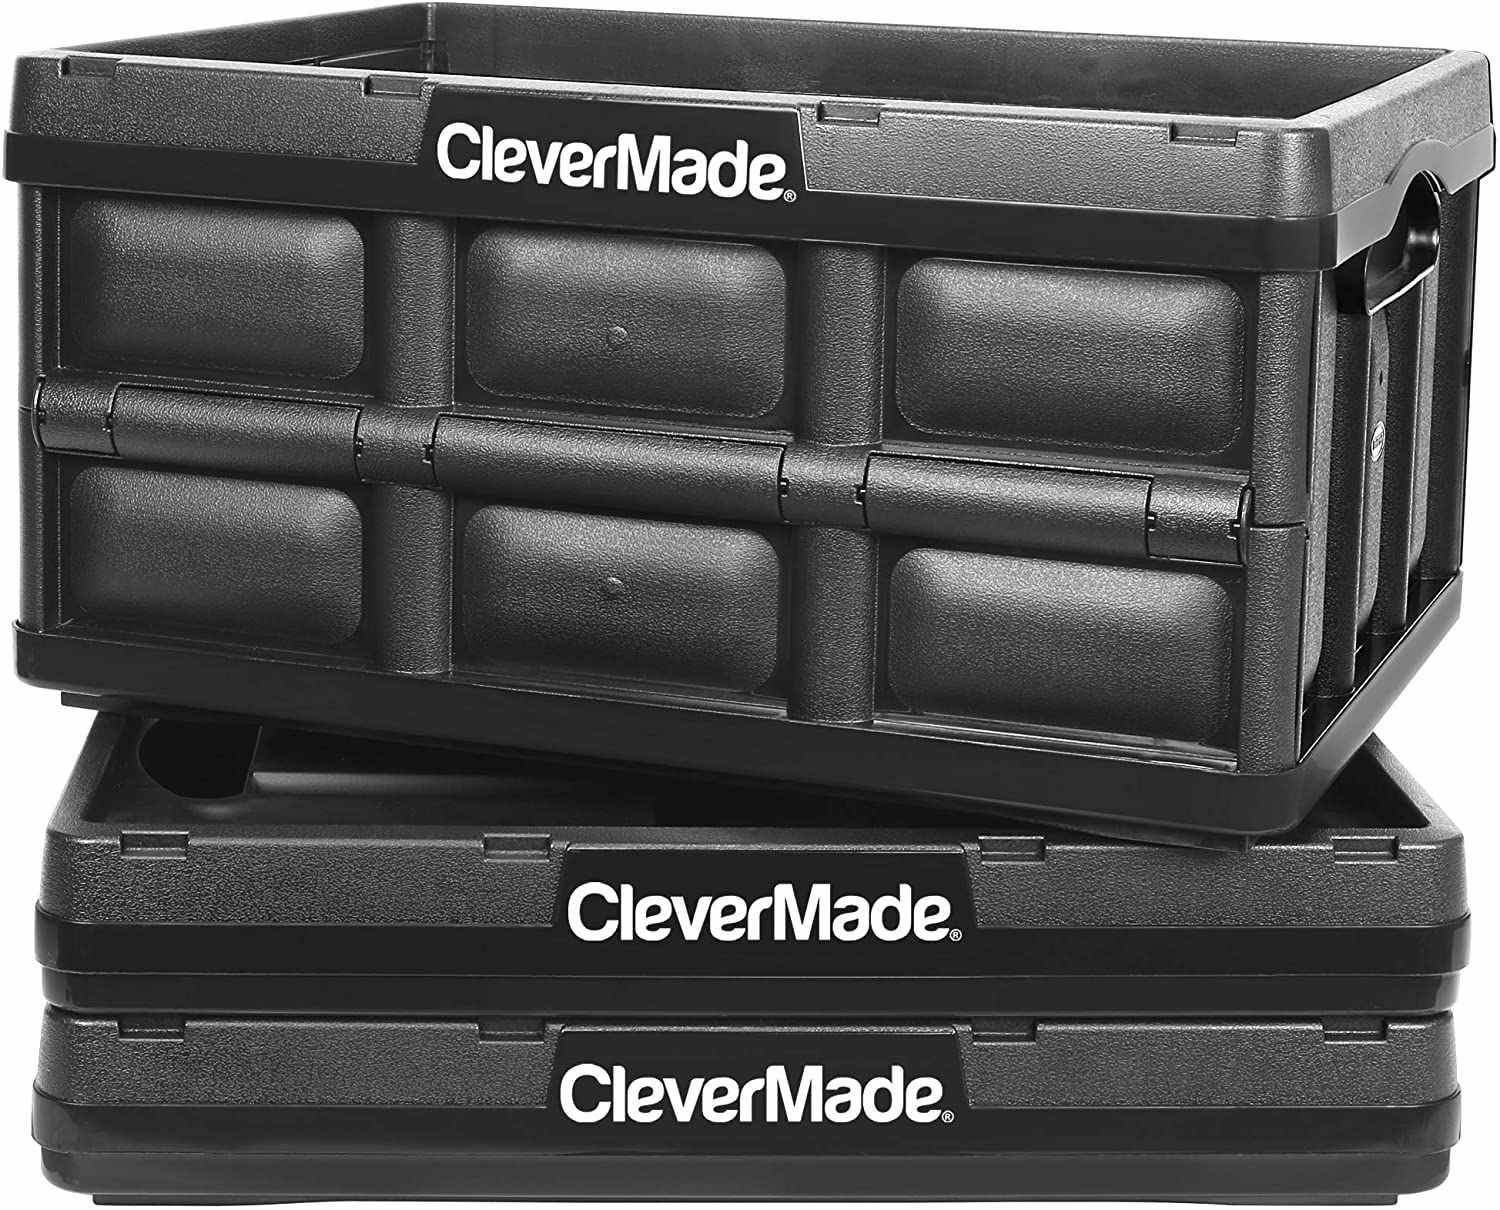 A pack of three CleverMade collapsible storage bins.